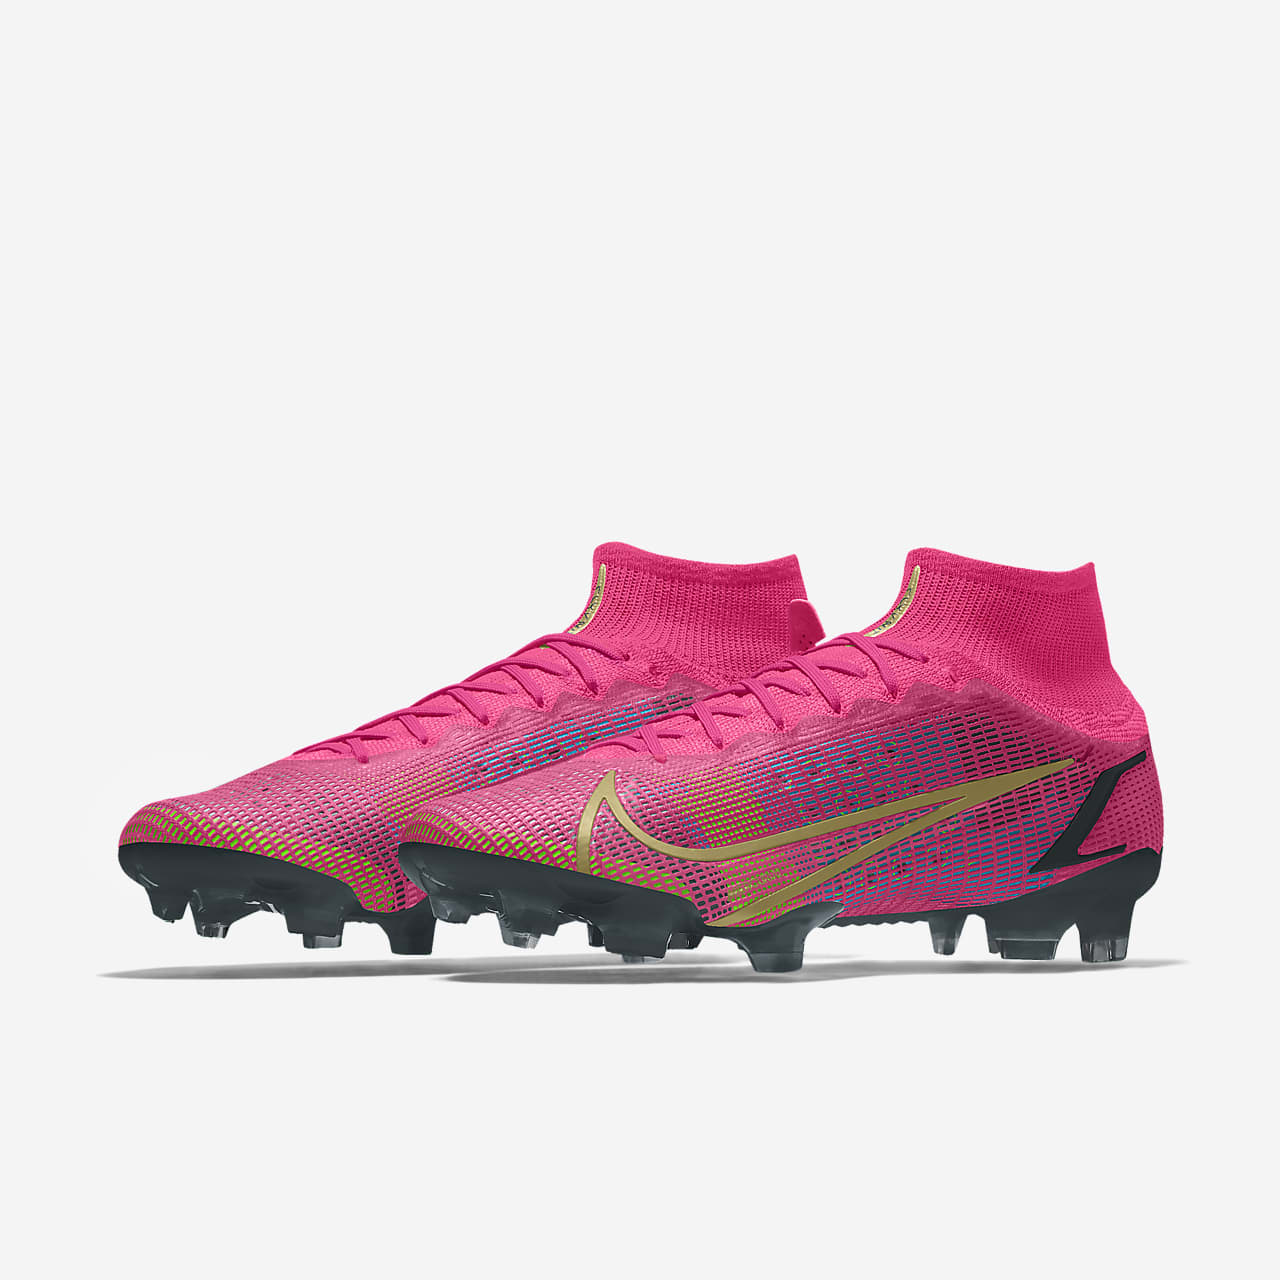 nike superfly cleats